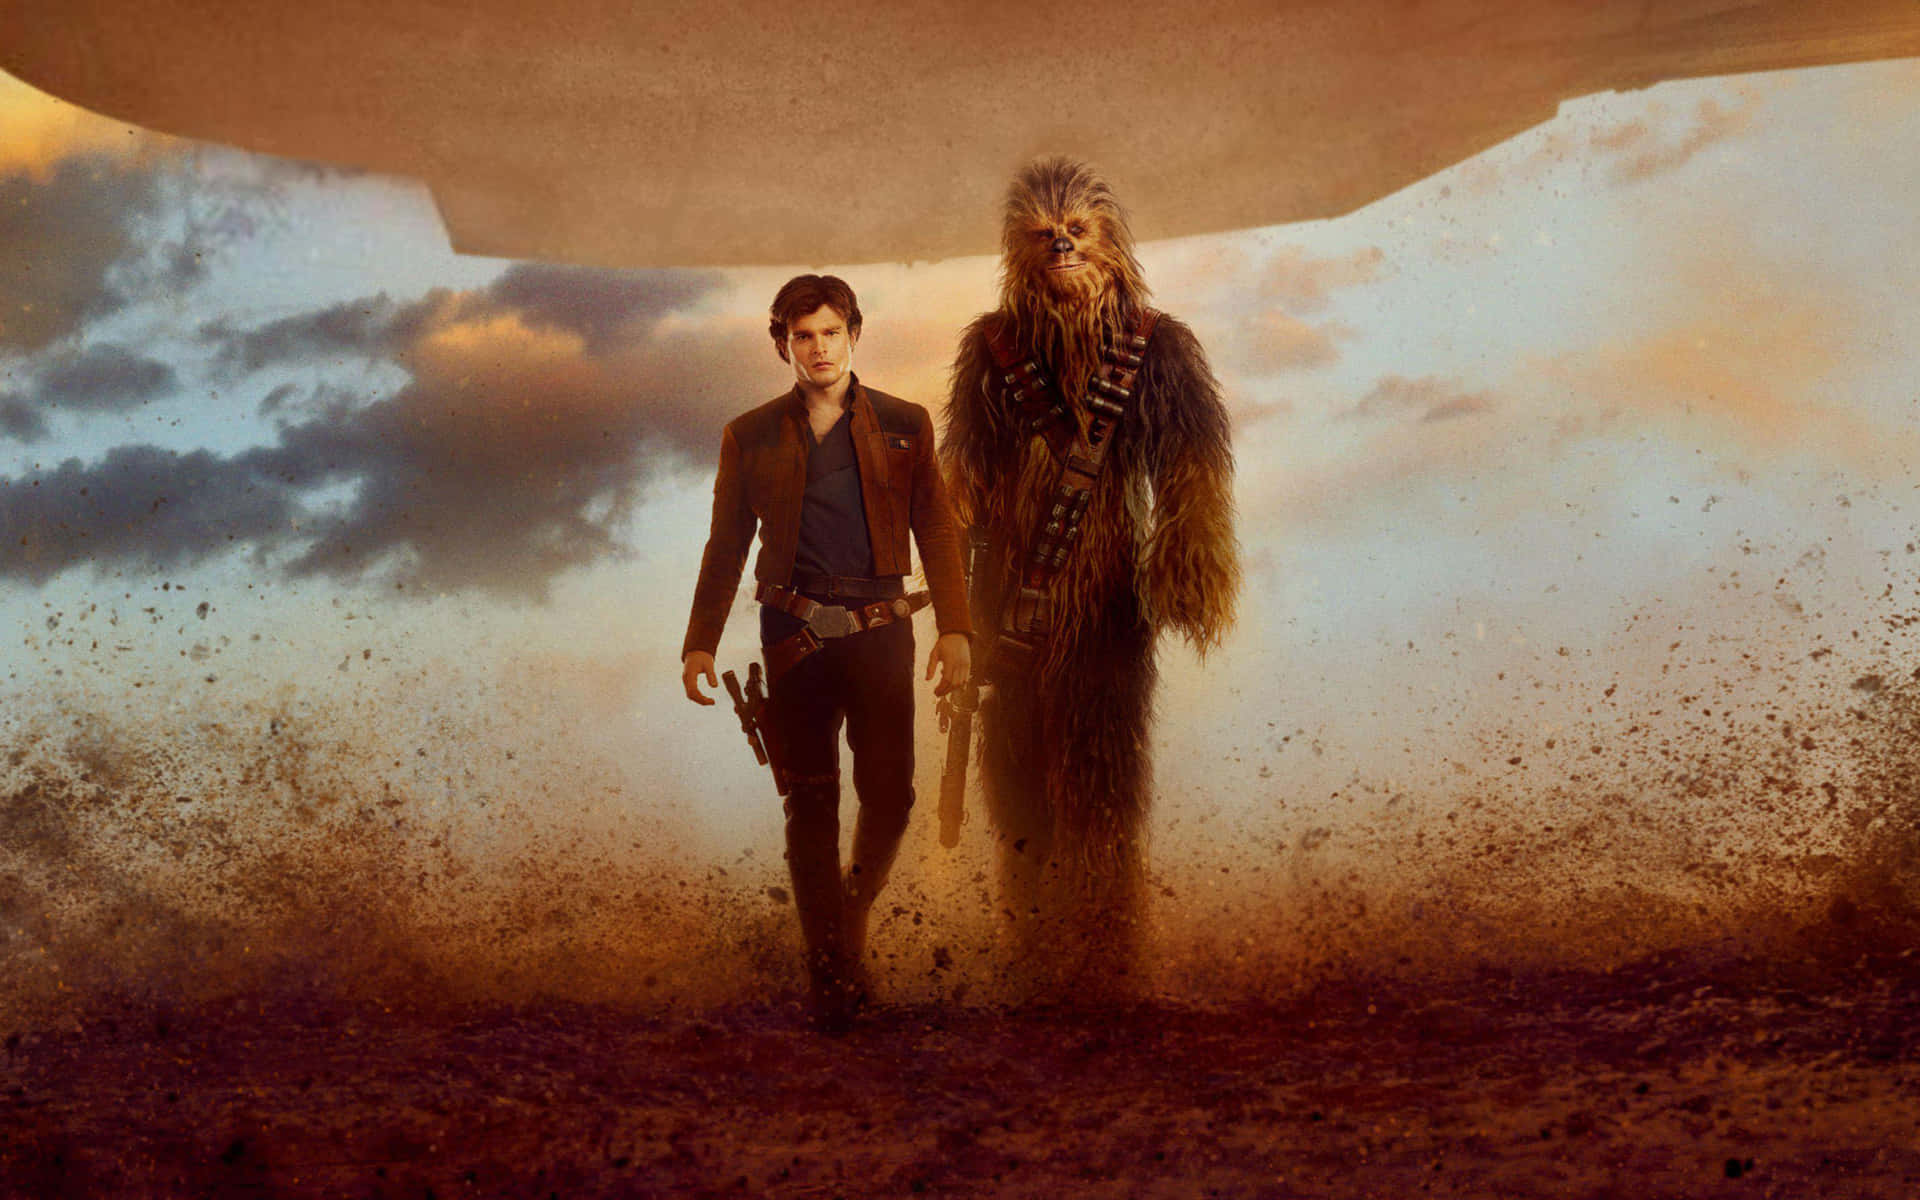 Han Solo and Chewbacca in "Solo: A Star Wars Story" Wallpaper